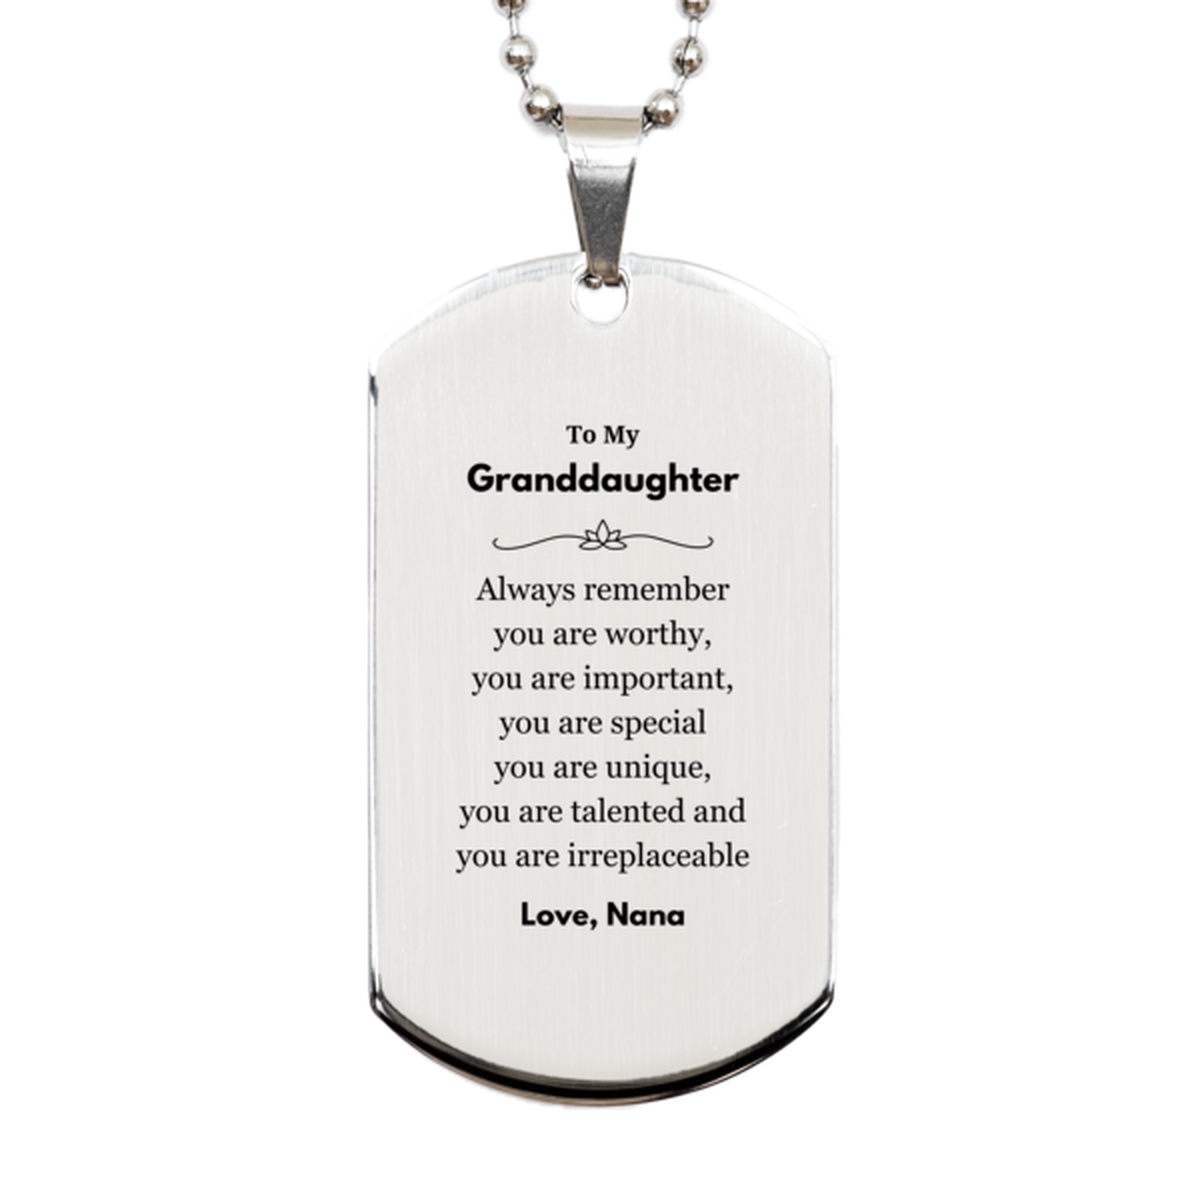 Granddaughter Birthday Gifts from Nana, Inspirational Silver Dog Tag for Granddaughter Christmas Graduation Gifts for Granddaughter Always remember you are worthy, you are important. Love, Nana